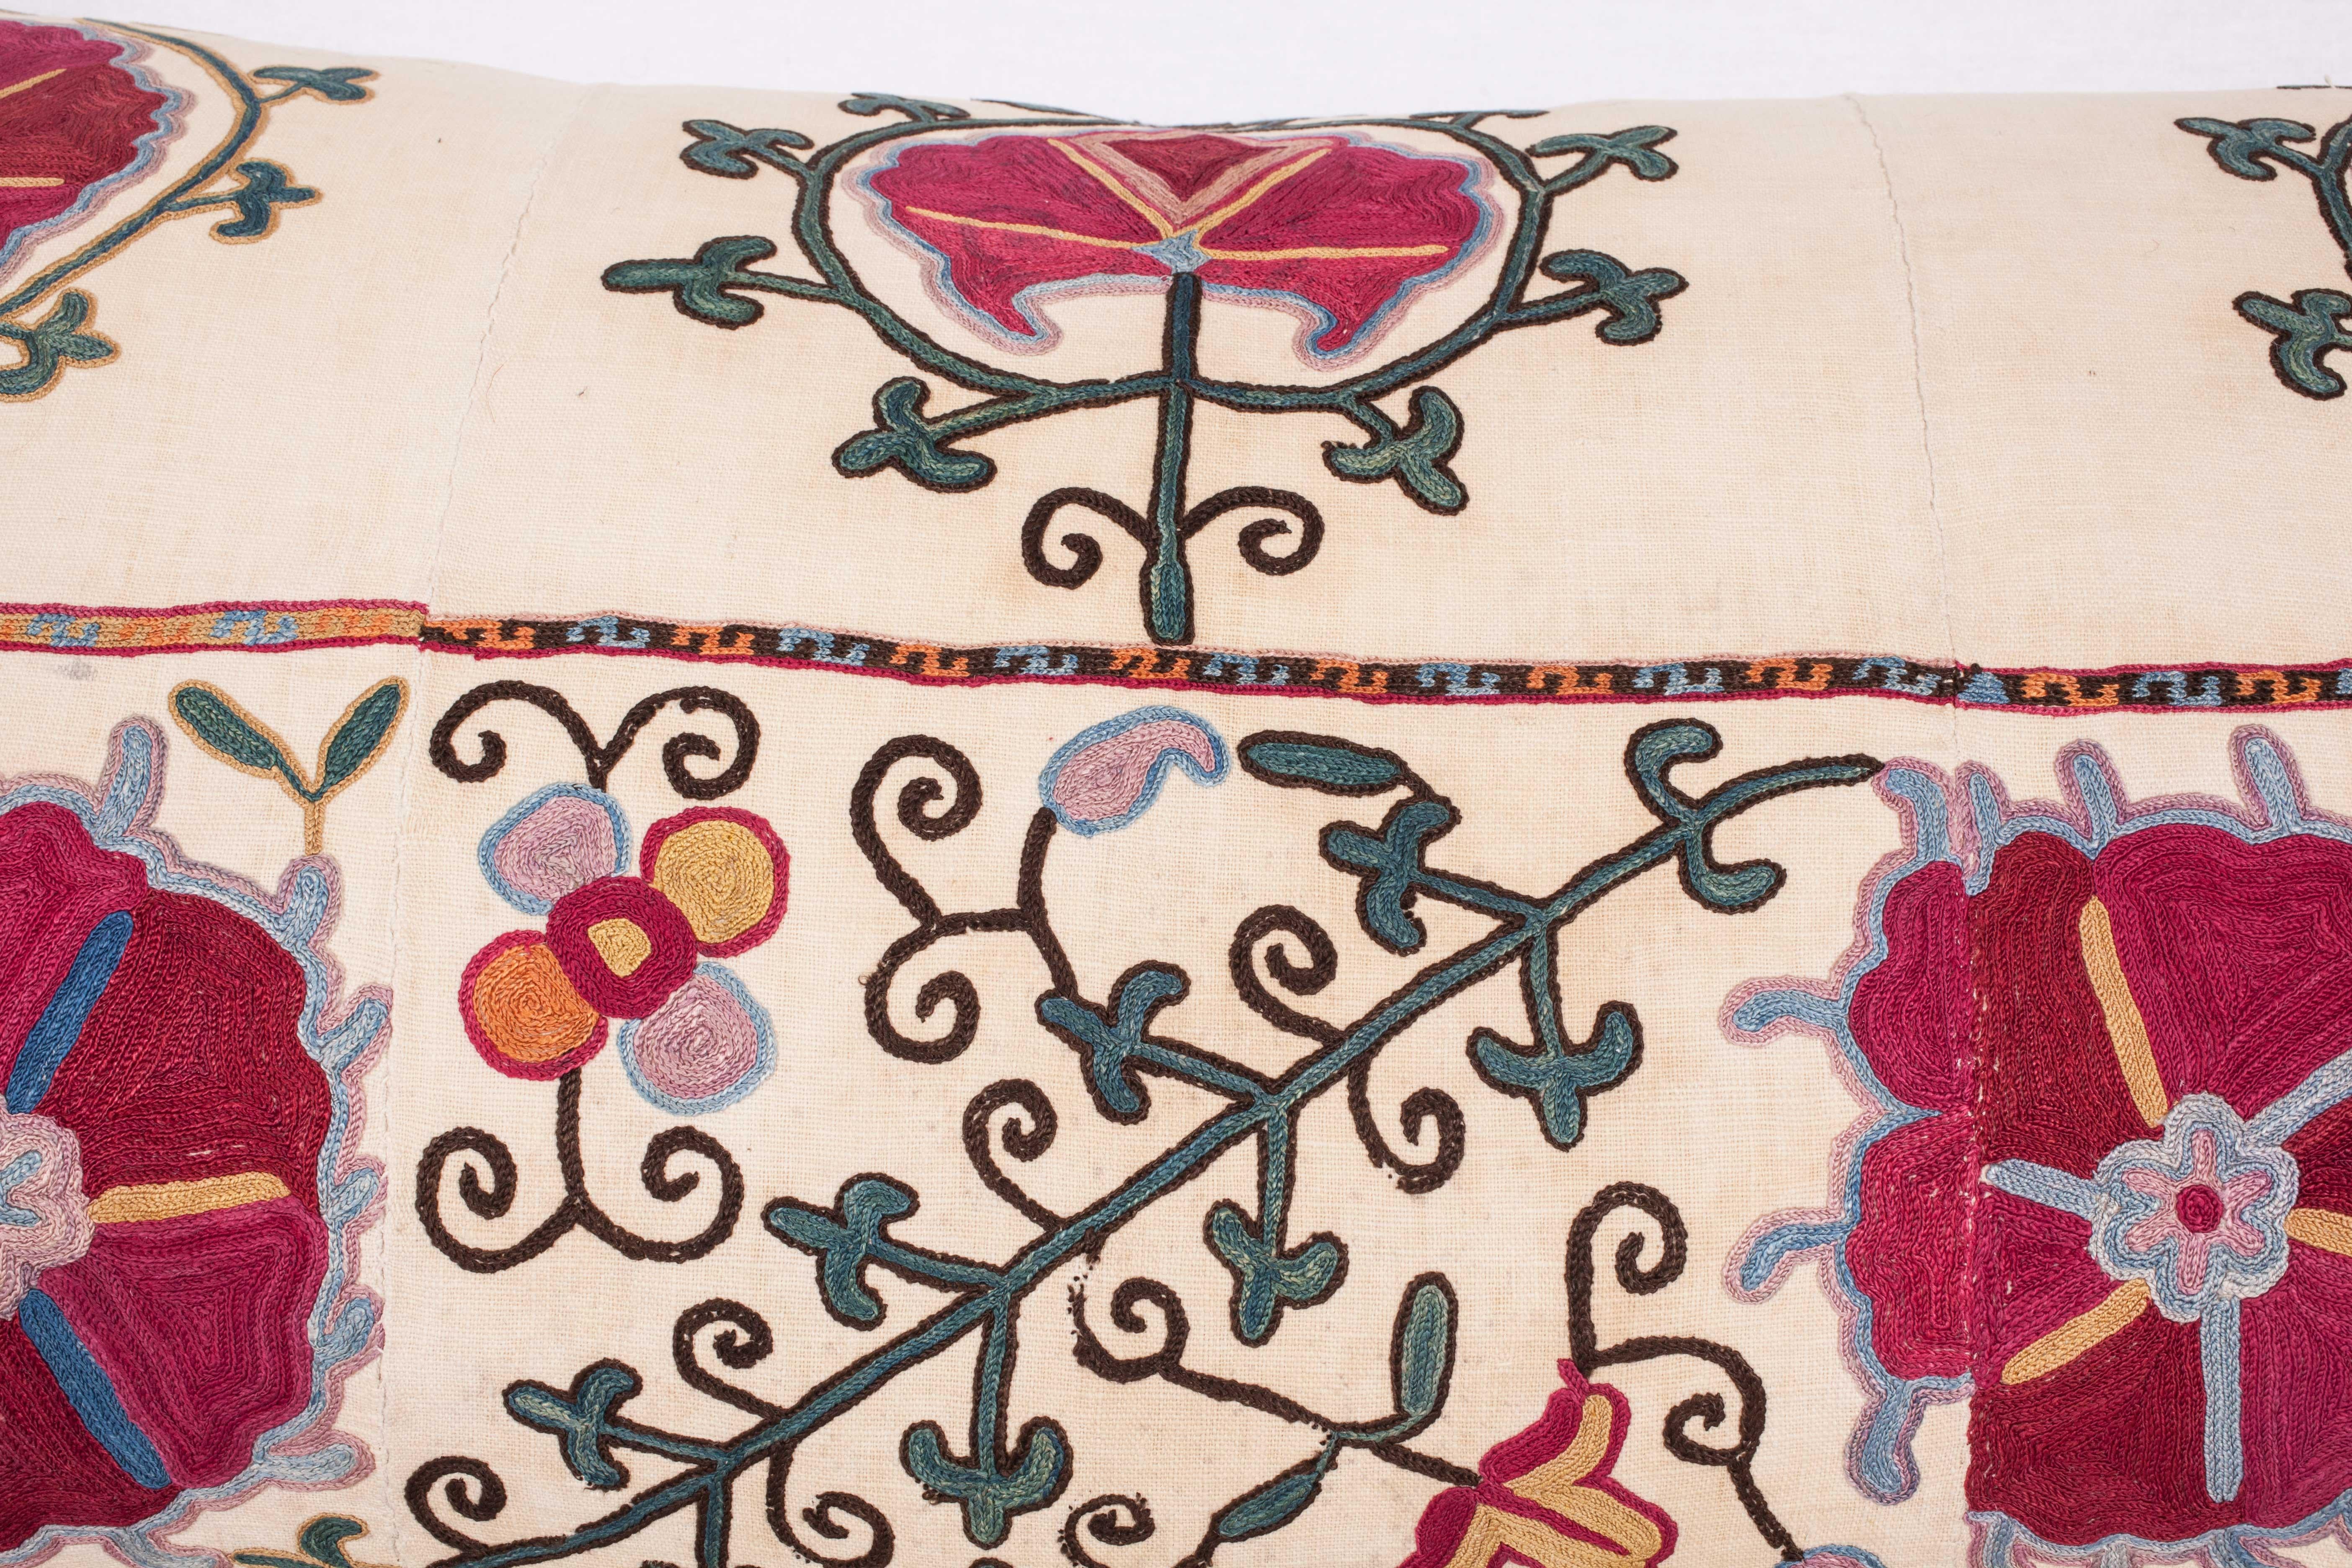 Embroidered Antique Suzani Pillow Case made from a Suzani from Bukhra, Uzbekistan